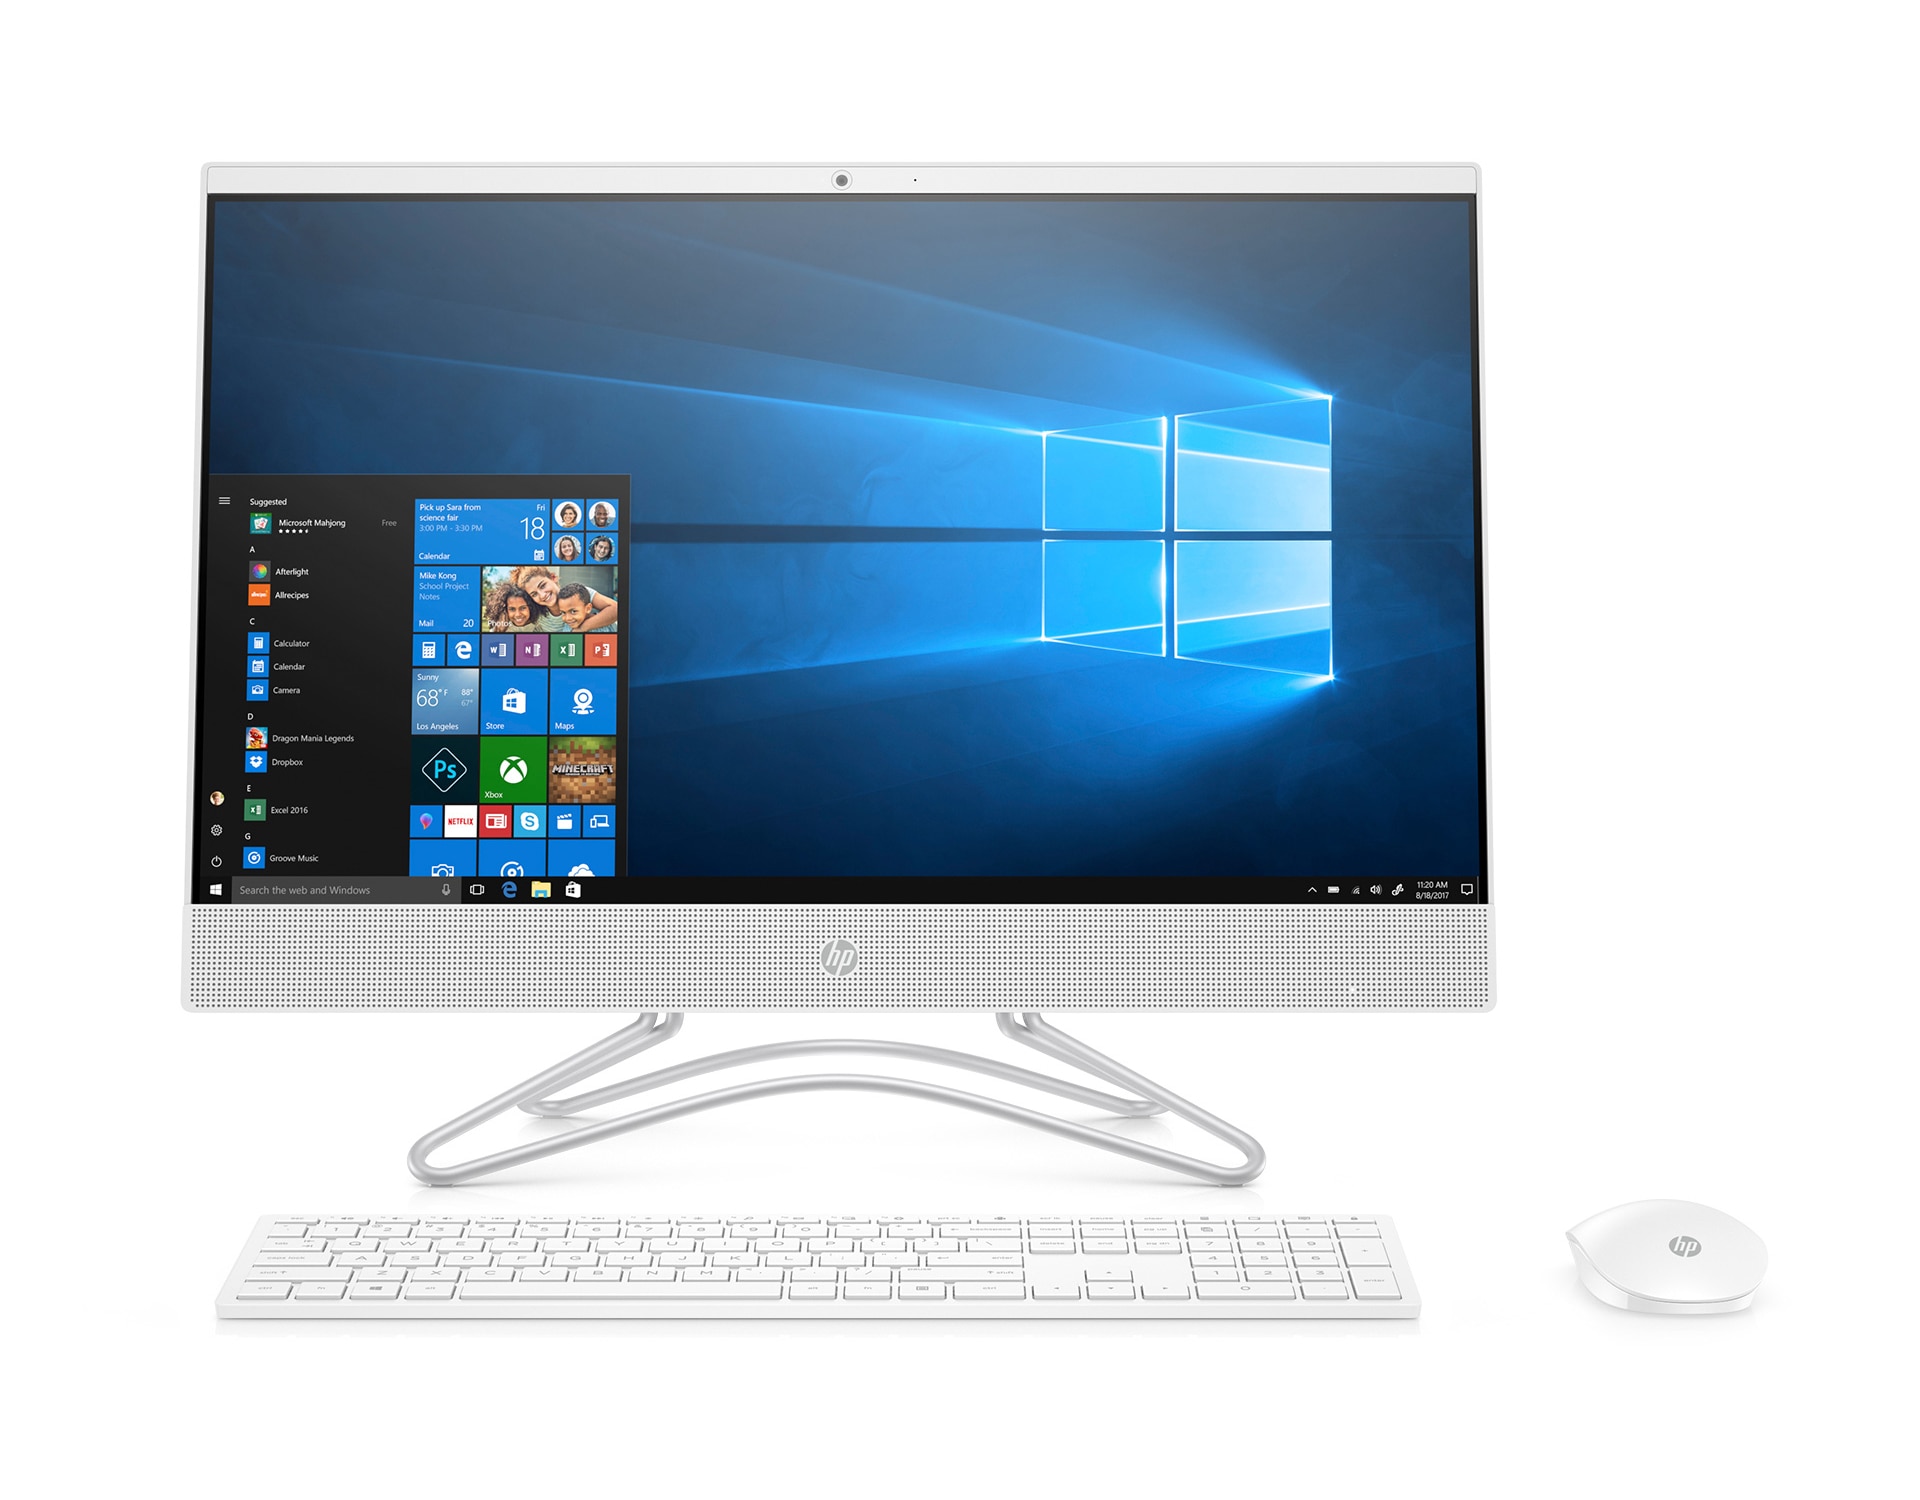 HP All-in-One 24-f0051jp スタンダードモデルG2 HP　BTO パソコン　格安通販